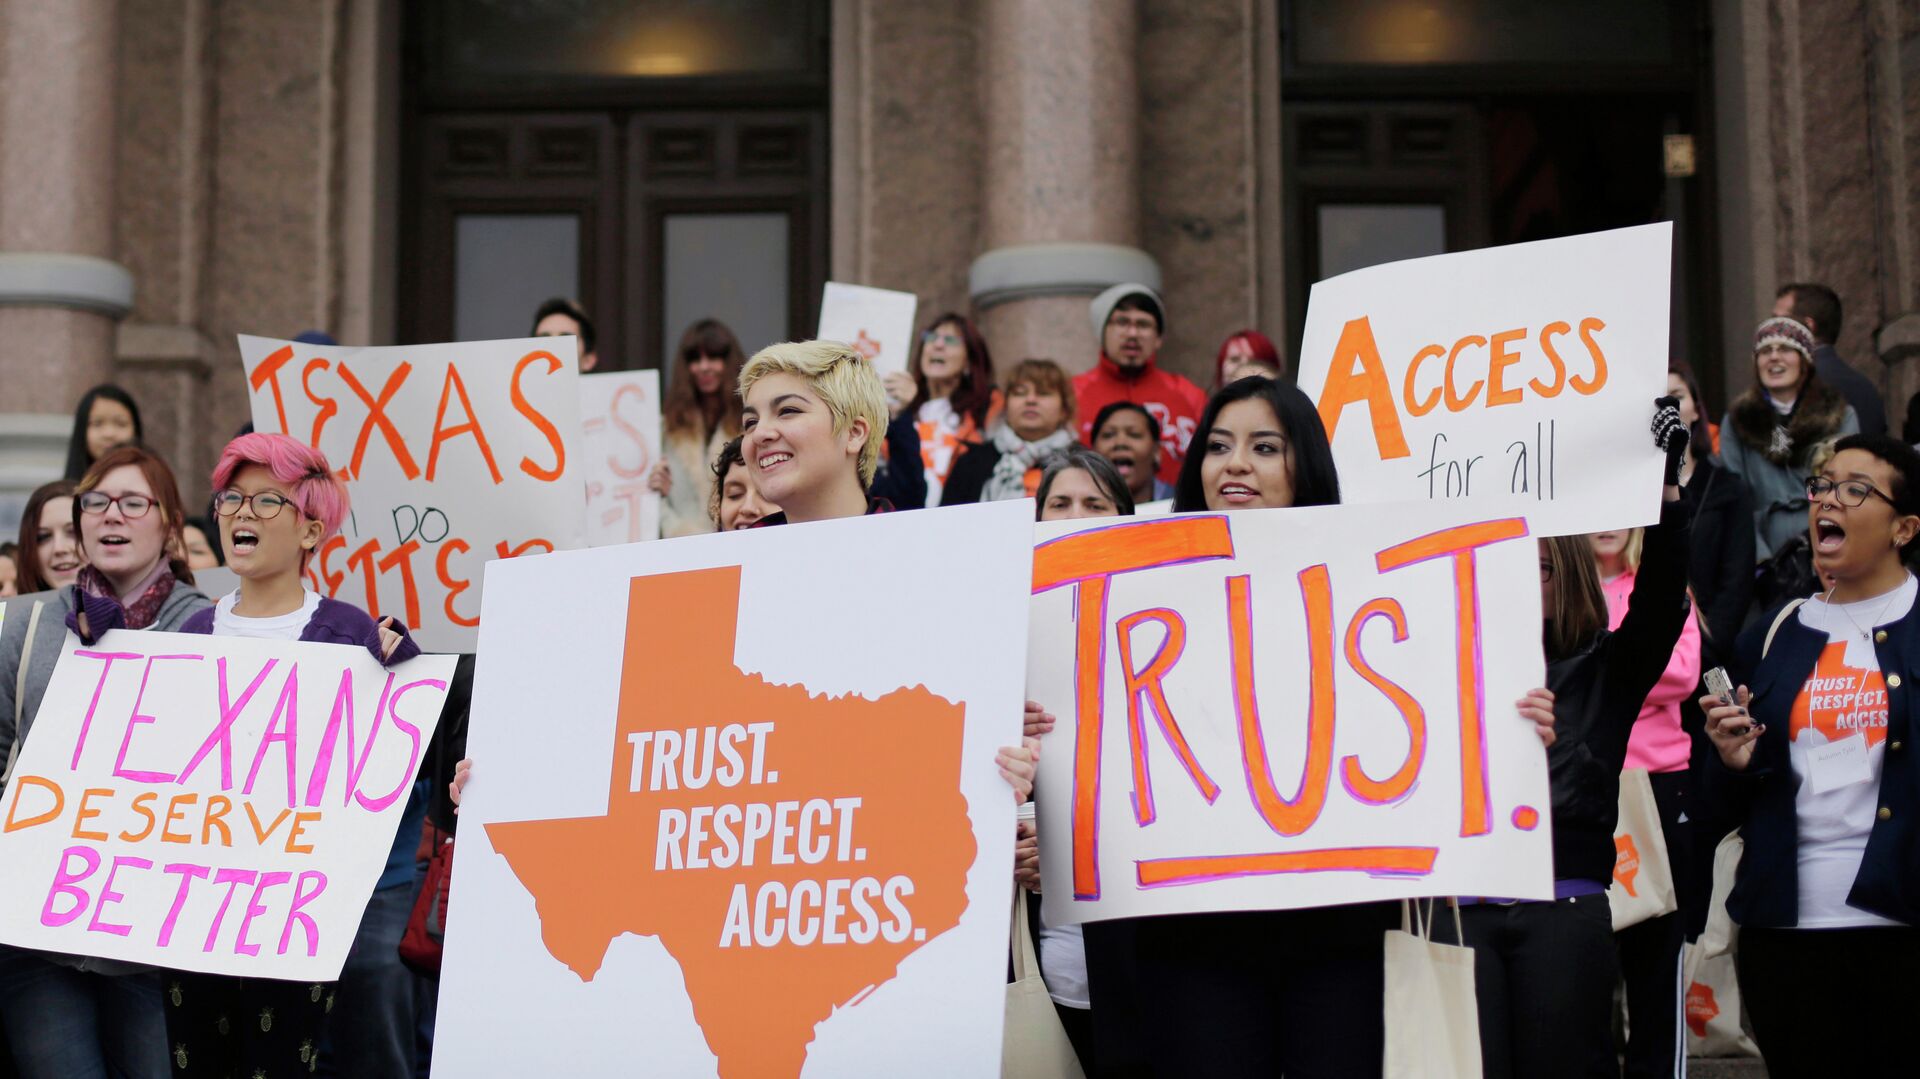 FILE - In this Feb. 26, 2015 file photo, college students and abortion rights activists hold signs during a rally on the steps of the Texas Capitol, in Austin, Texas. The Supreme Court refused on Monday, June 29, 2015, to allow Texas to enforce restrictions that would force 10 abortion clinics to close - Sputnik International, 1920, 02.09.2021